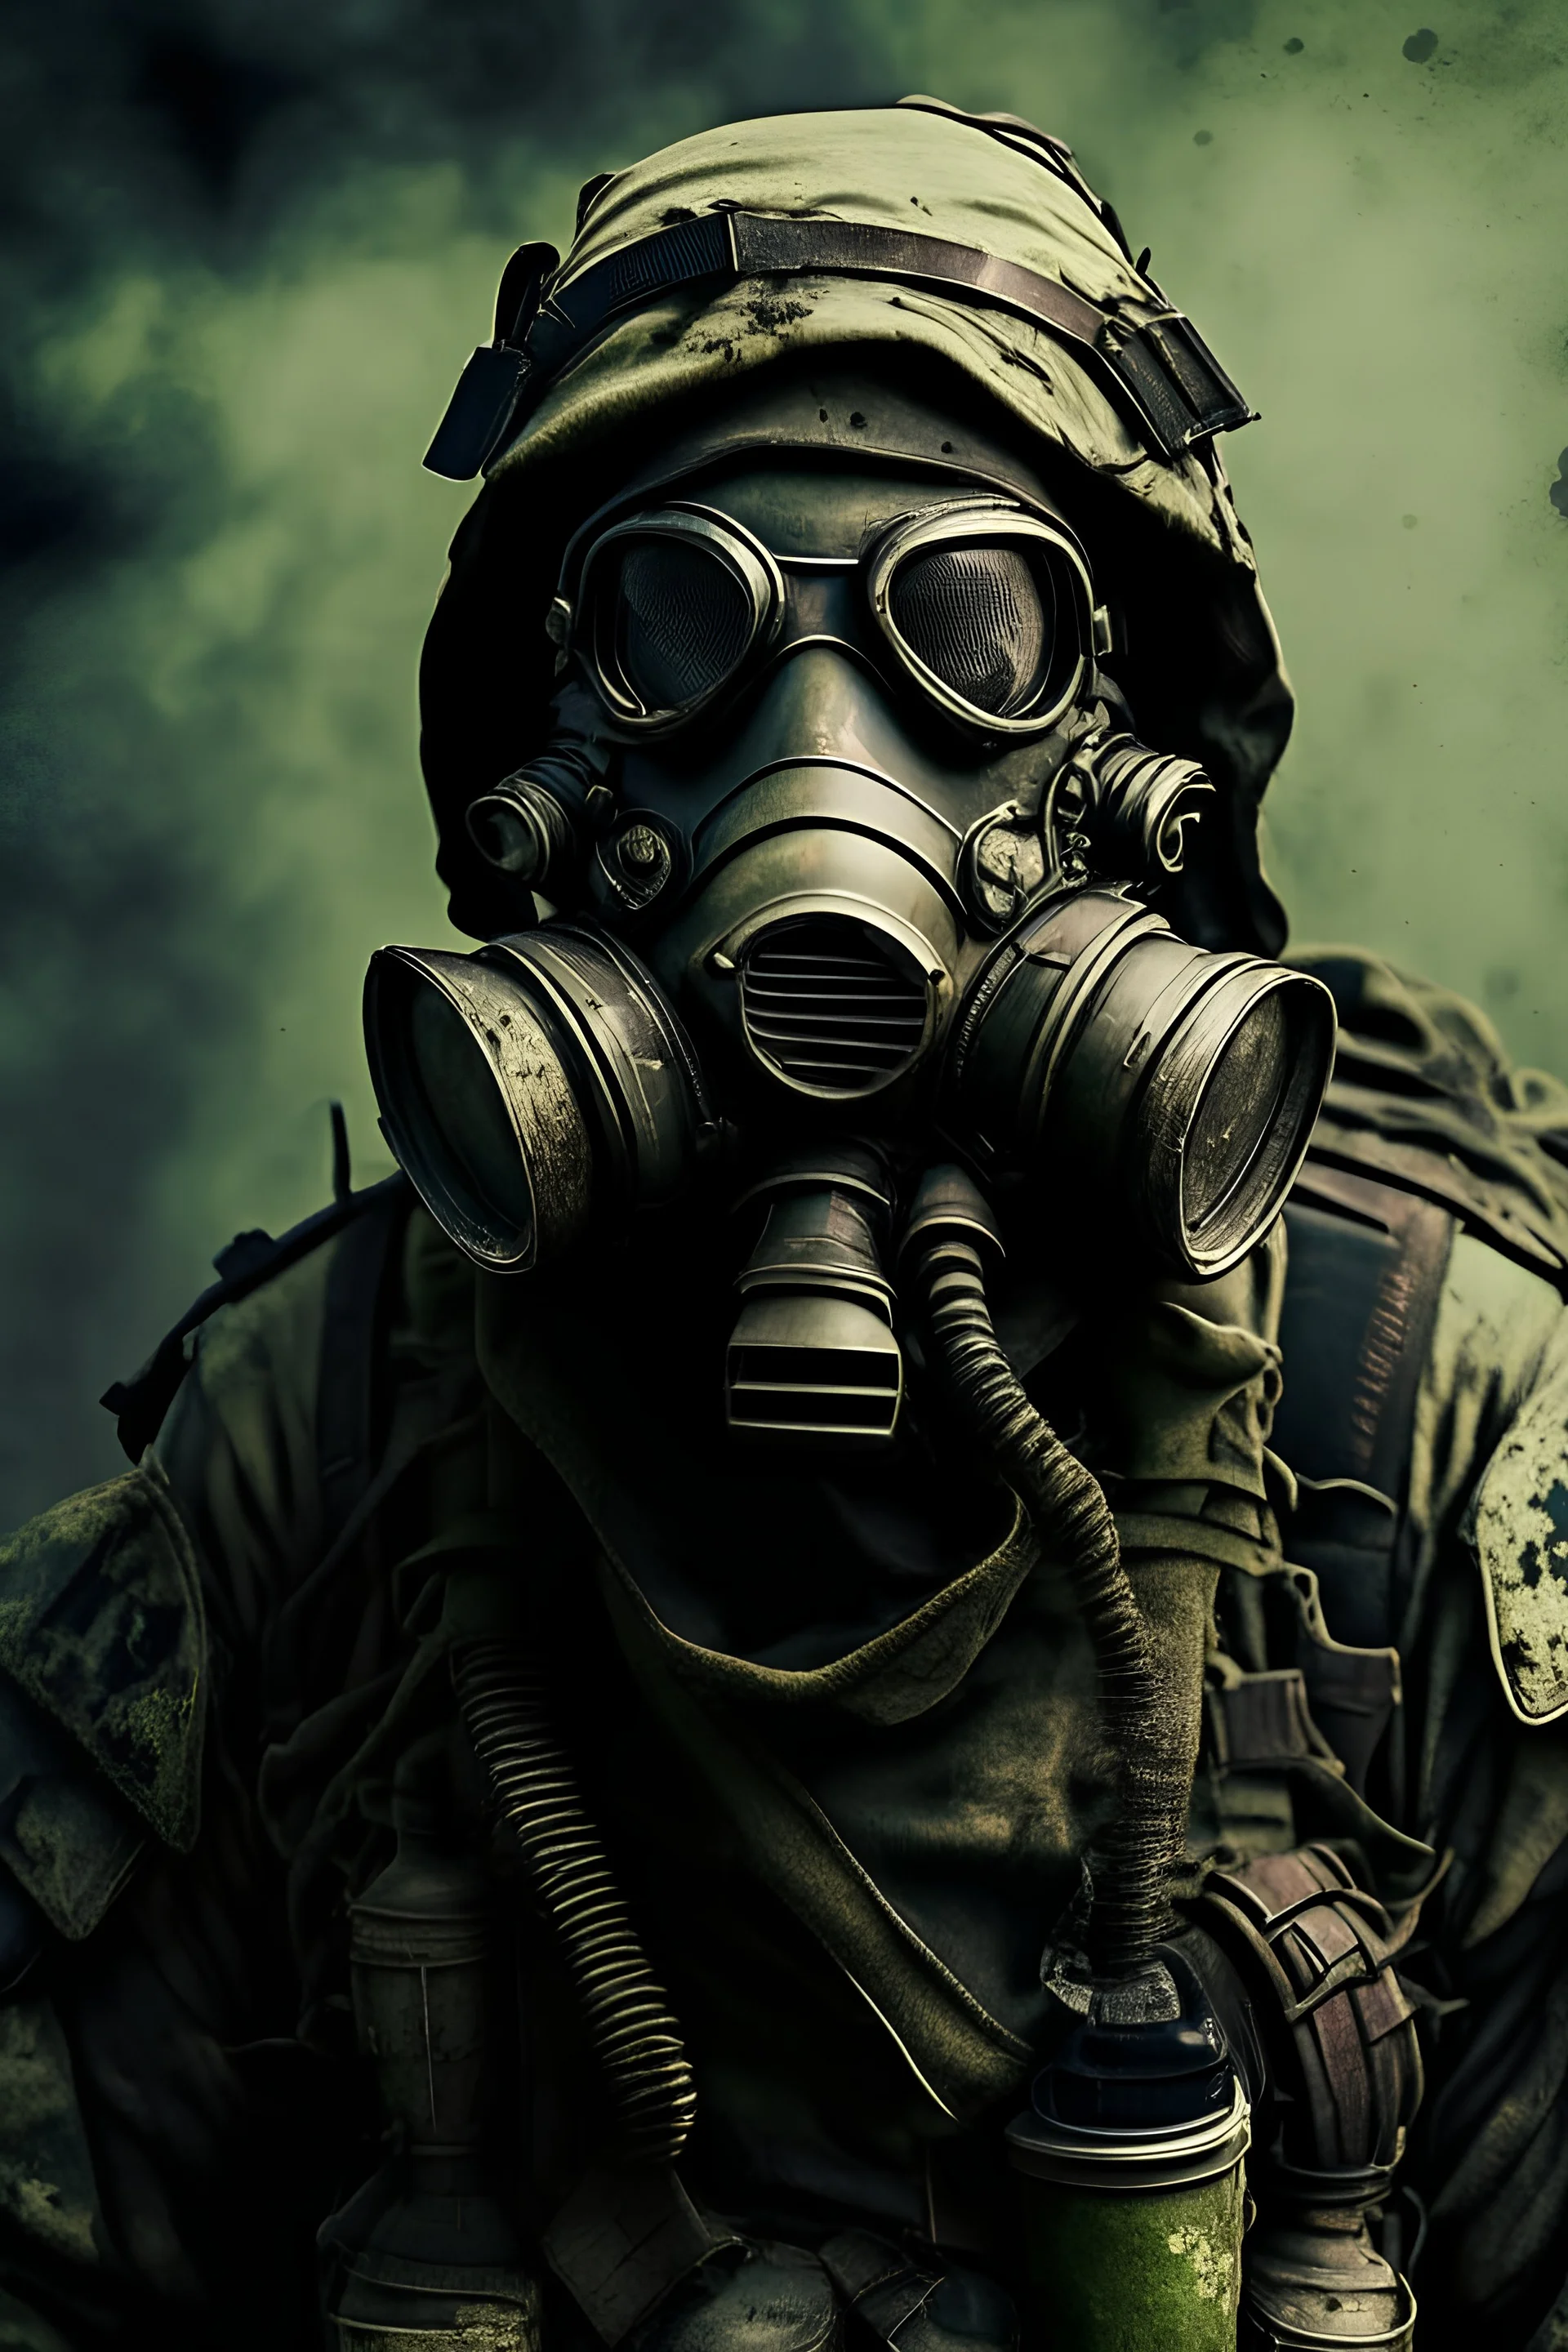 grunge armored soldier with gas mask